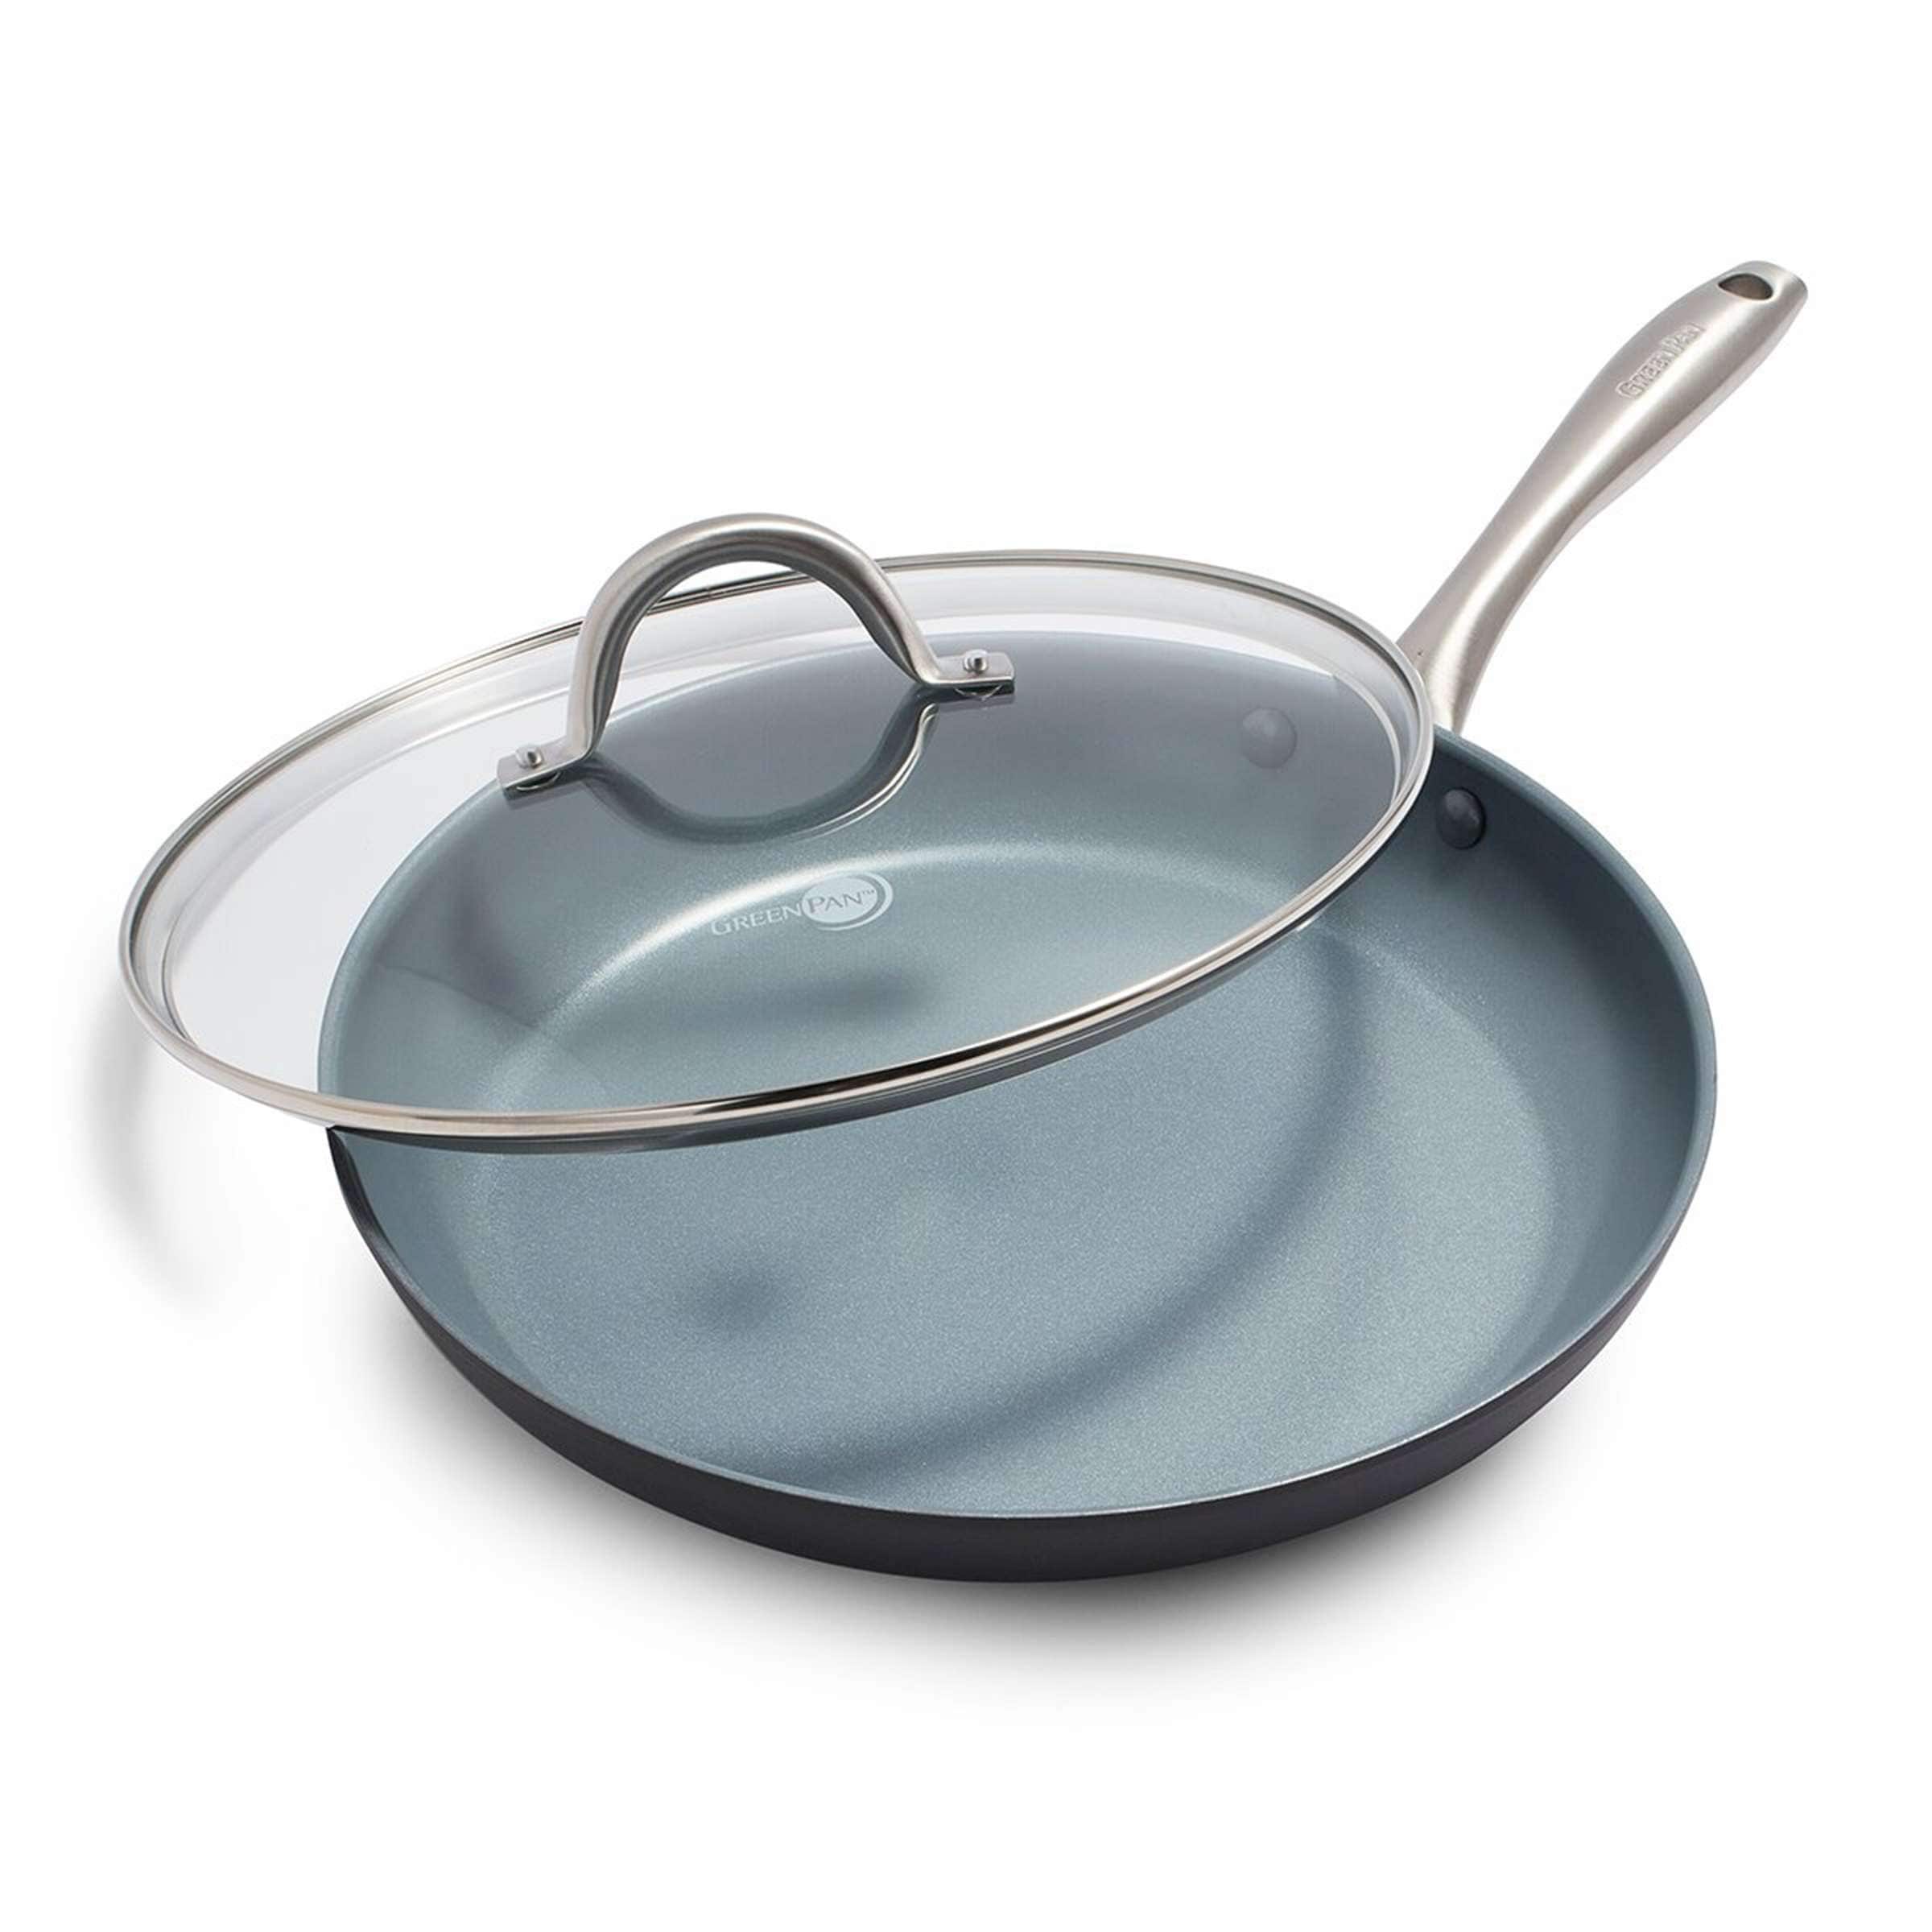 https://ak1.ostkcdn.com/images/products/is/images/direct/7b6e4822d430e15d8a2d24997023435a59733473/GreenPan-Lima-Ceramic-Non-Stick-Covered-Frypan.jpg